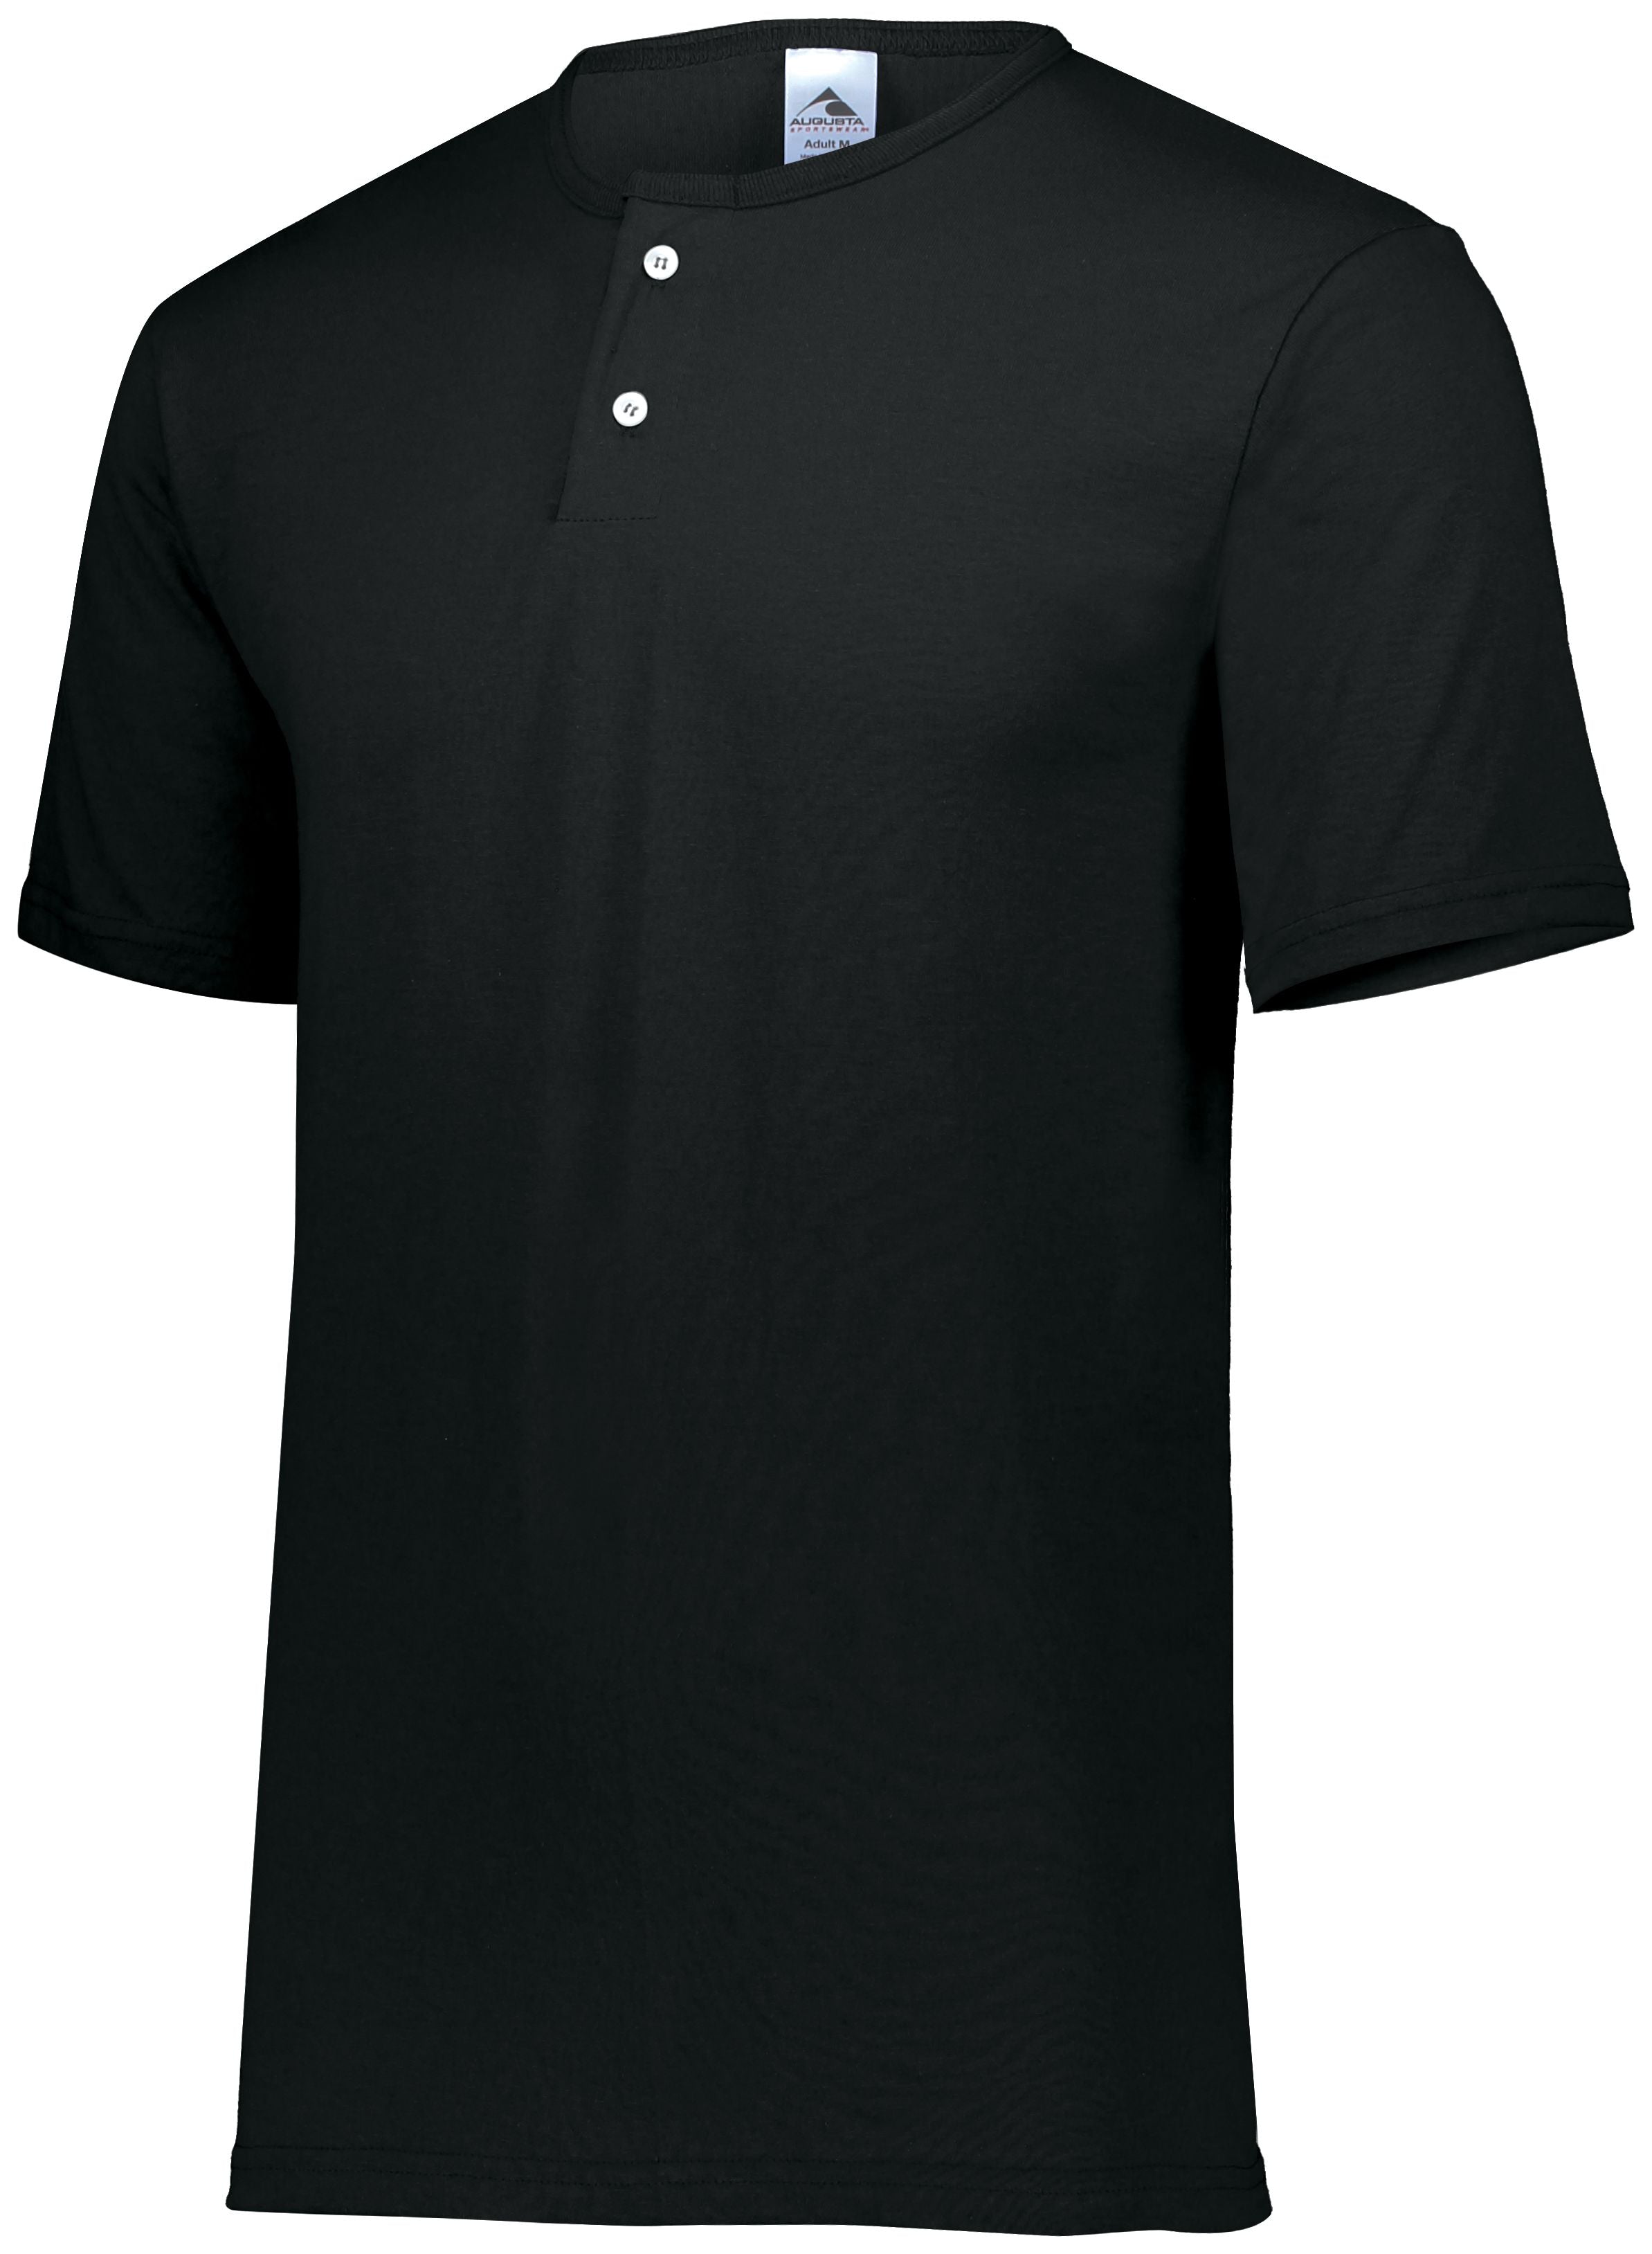 Augusta Sportswear Two-Button Baseball Jersey in Black  -Part of the Adult, Adult-Jersey, Augusta-Products, Baseball, Shirts, All-Sports, All-Sports-1 product lines at KanaleyCreations.com